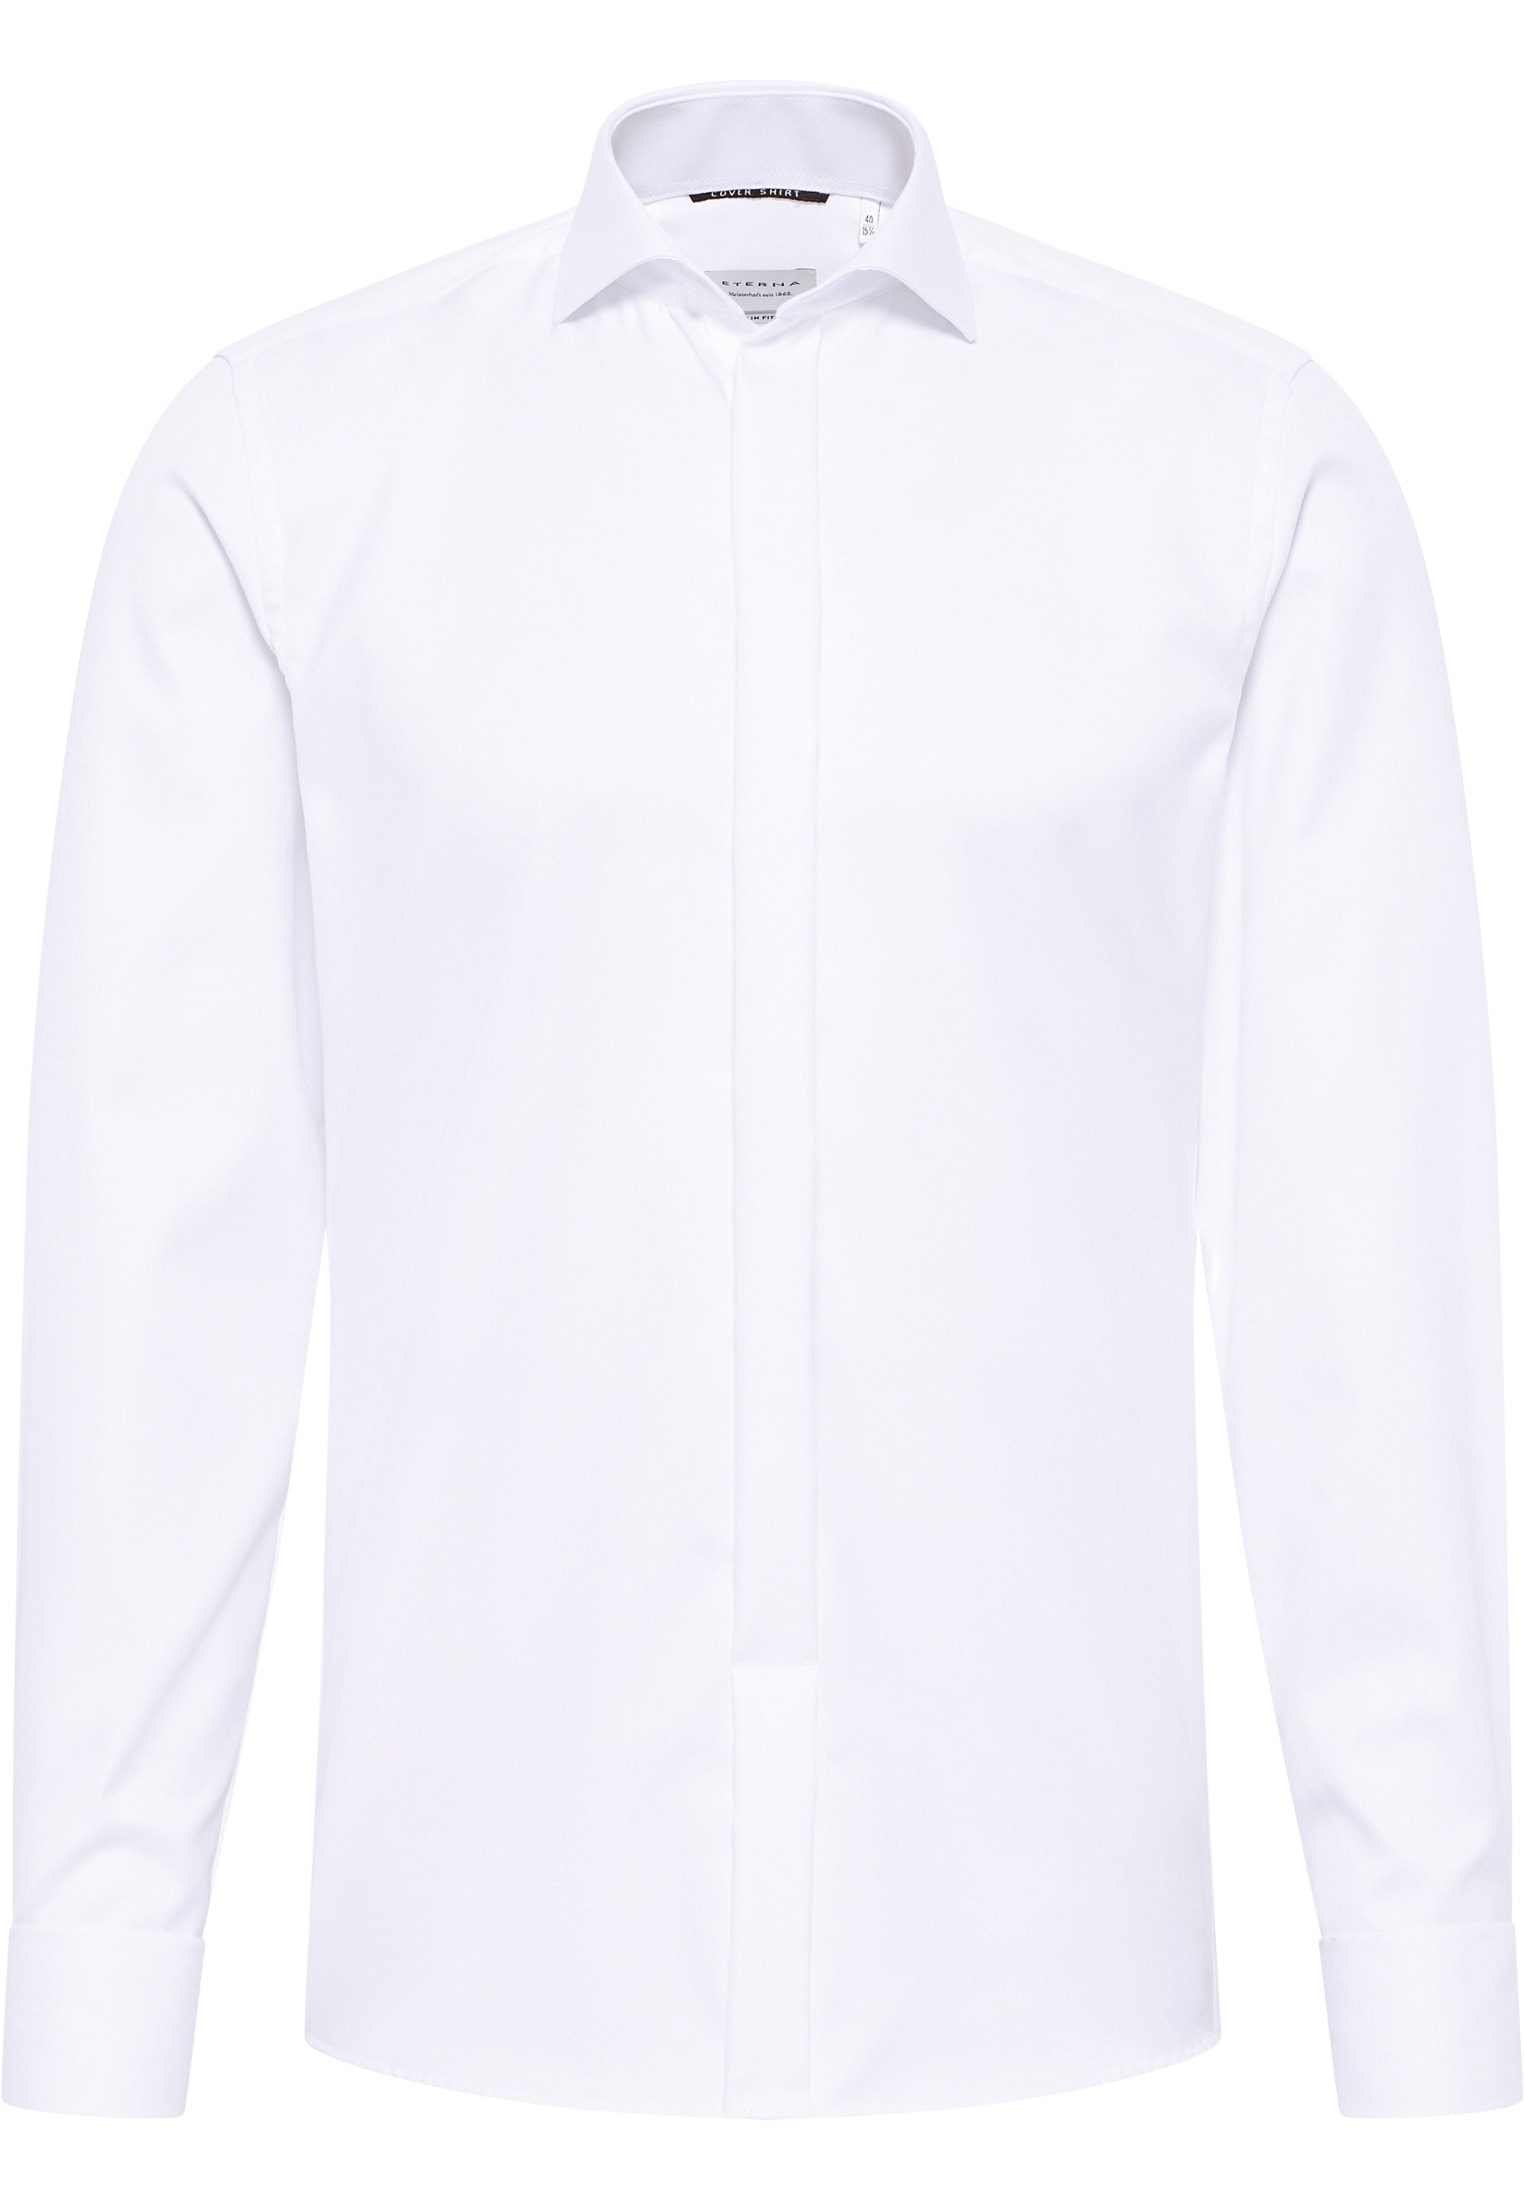 SLIM FIT Cover Shirt in wit vlakte